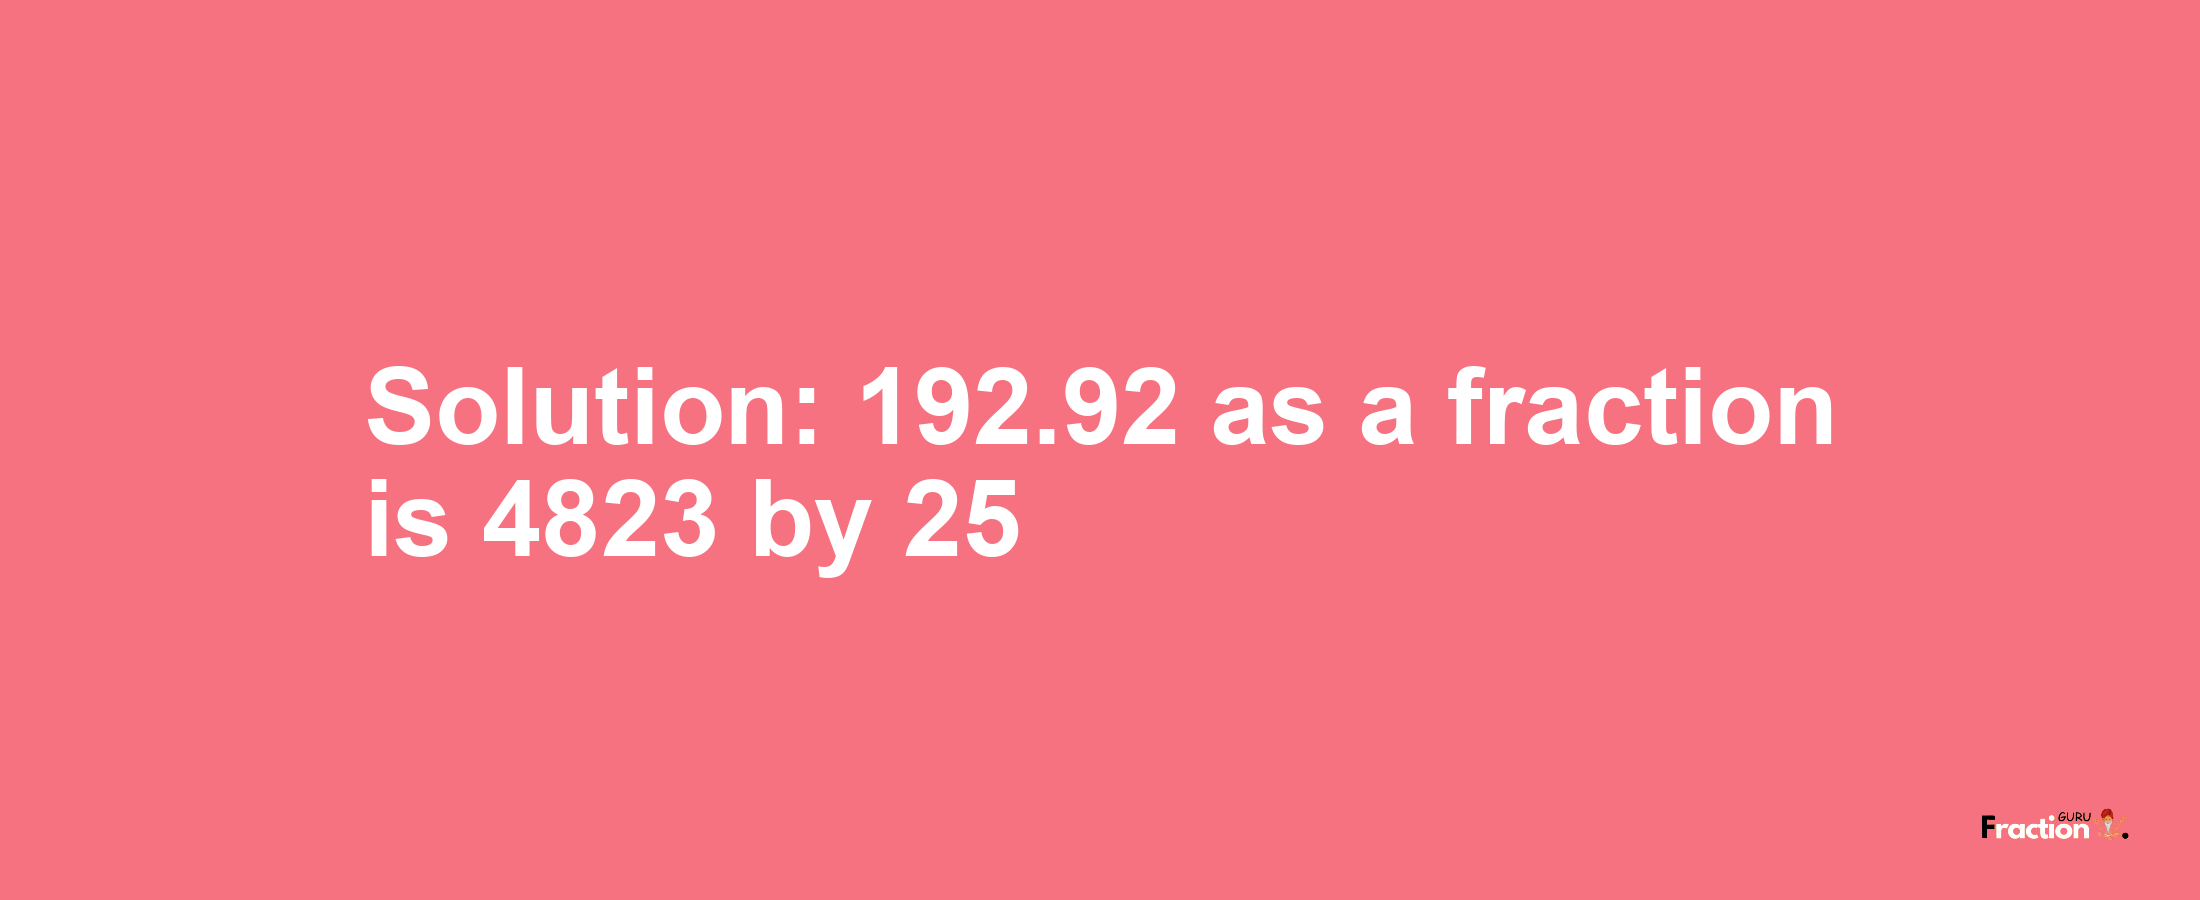 Solution:192.92 as a fraction is 4823/25